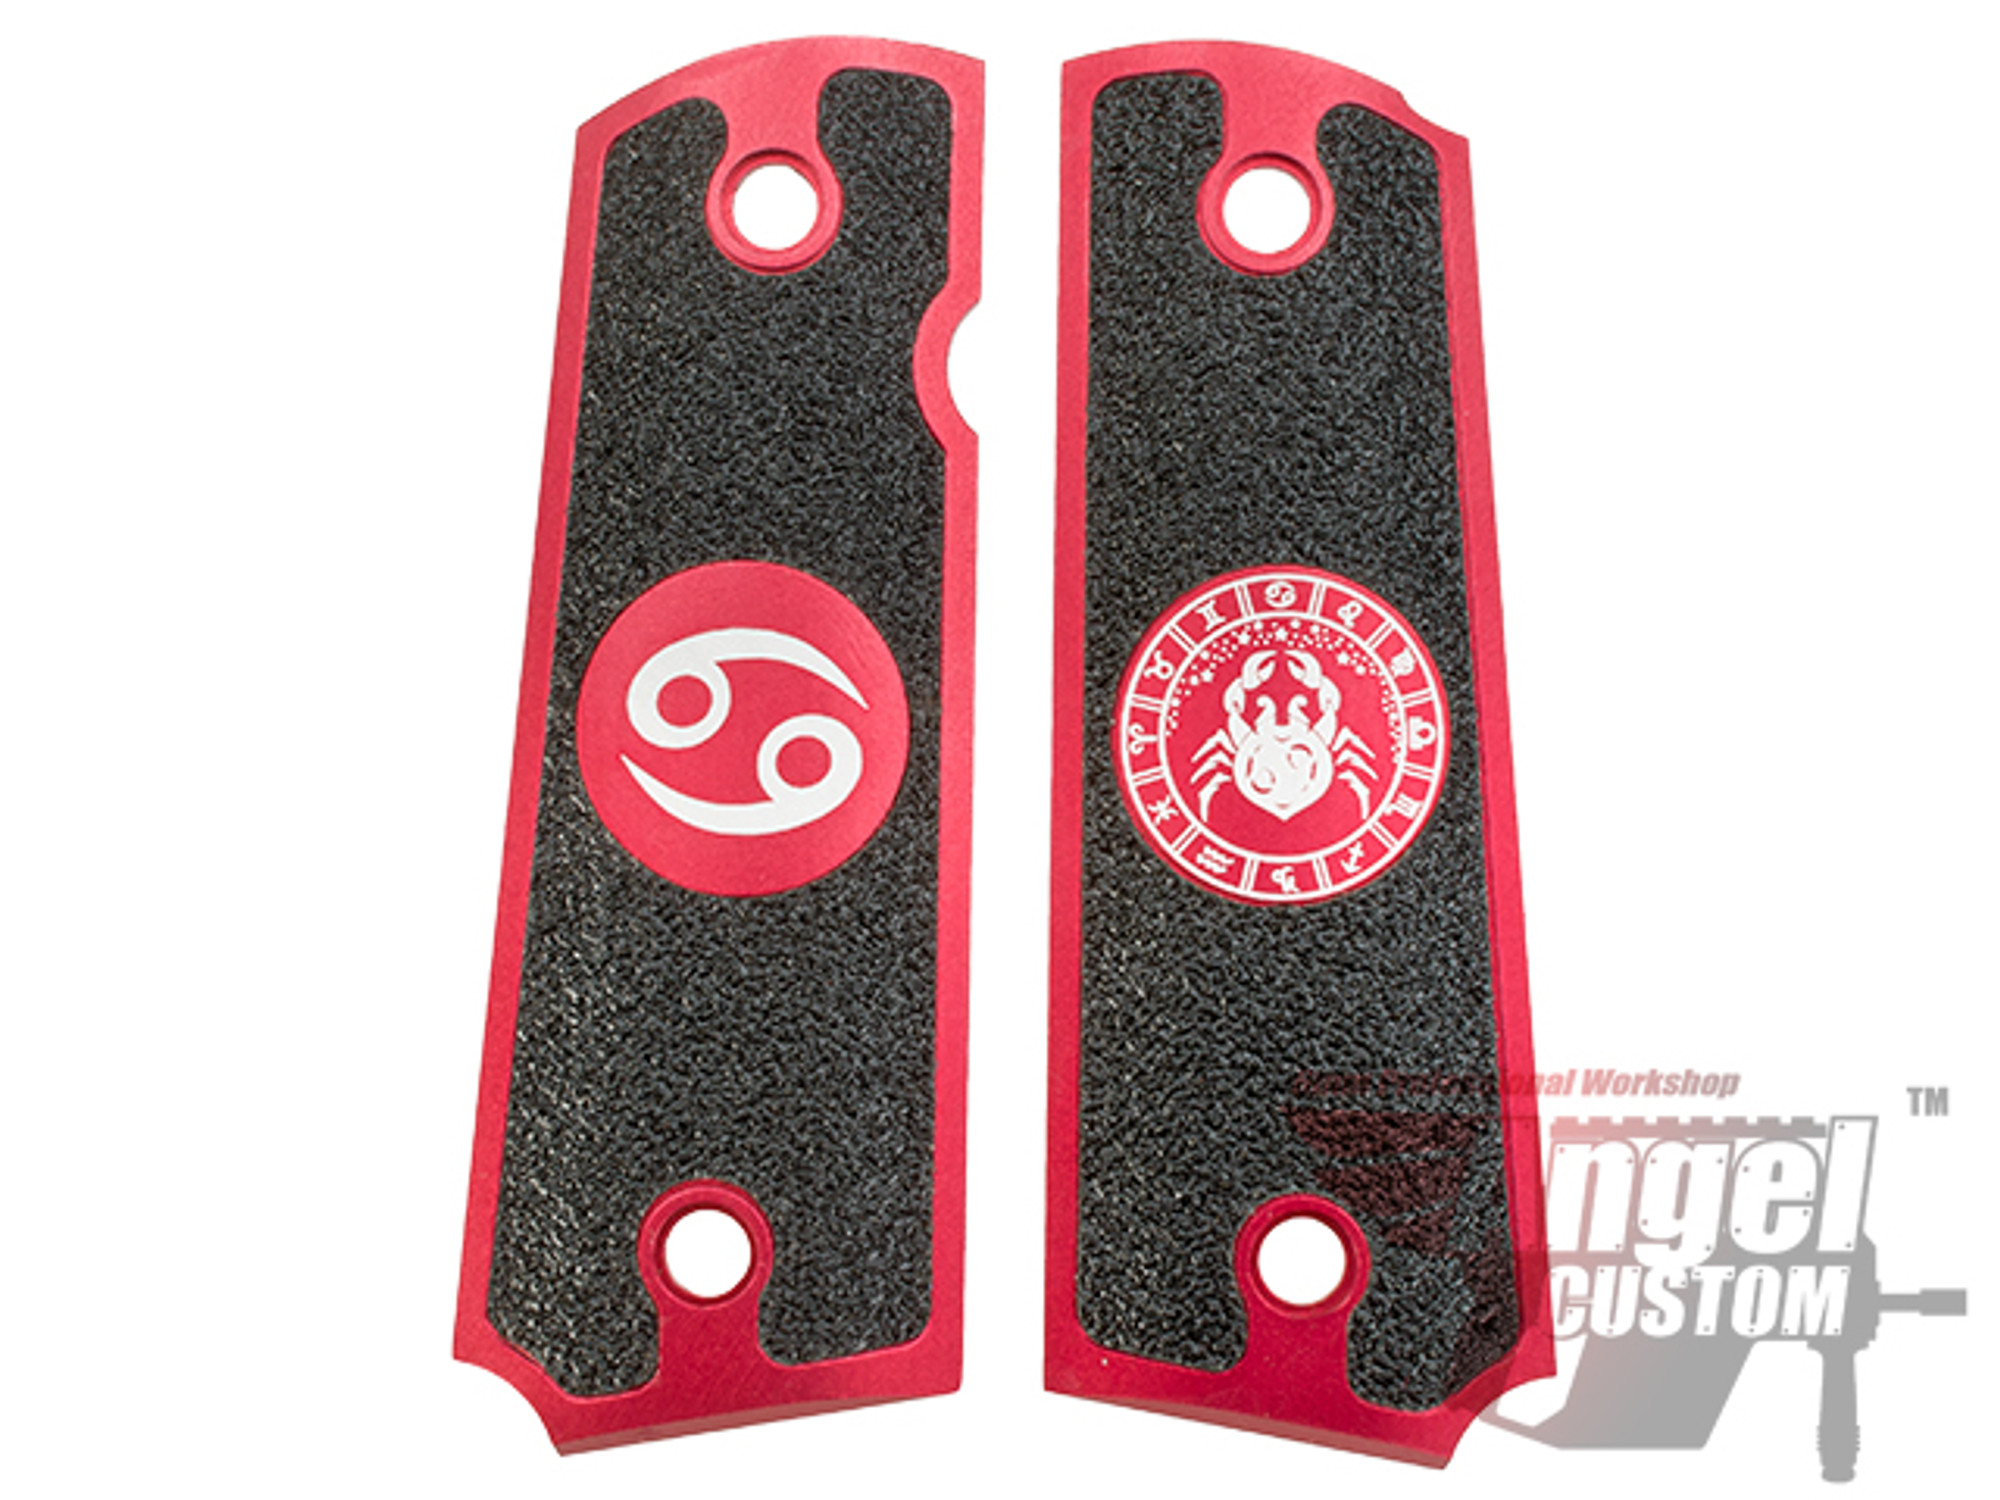 Angel Custom CNC Machined Tac-Glove "Zodiac" Grips for WE-Tech 1911 Series Airsoft Pistols - Cancer (Red)